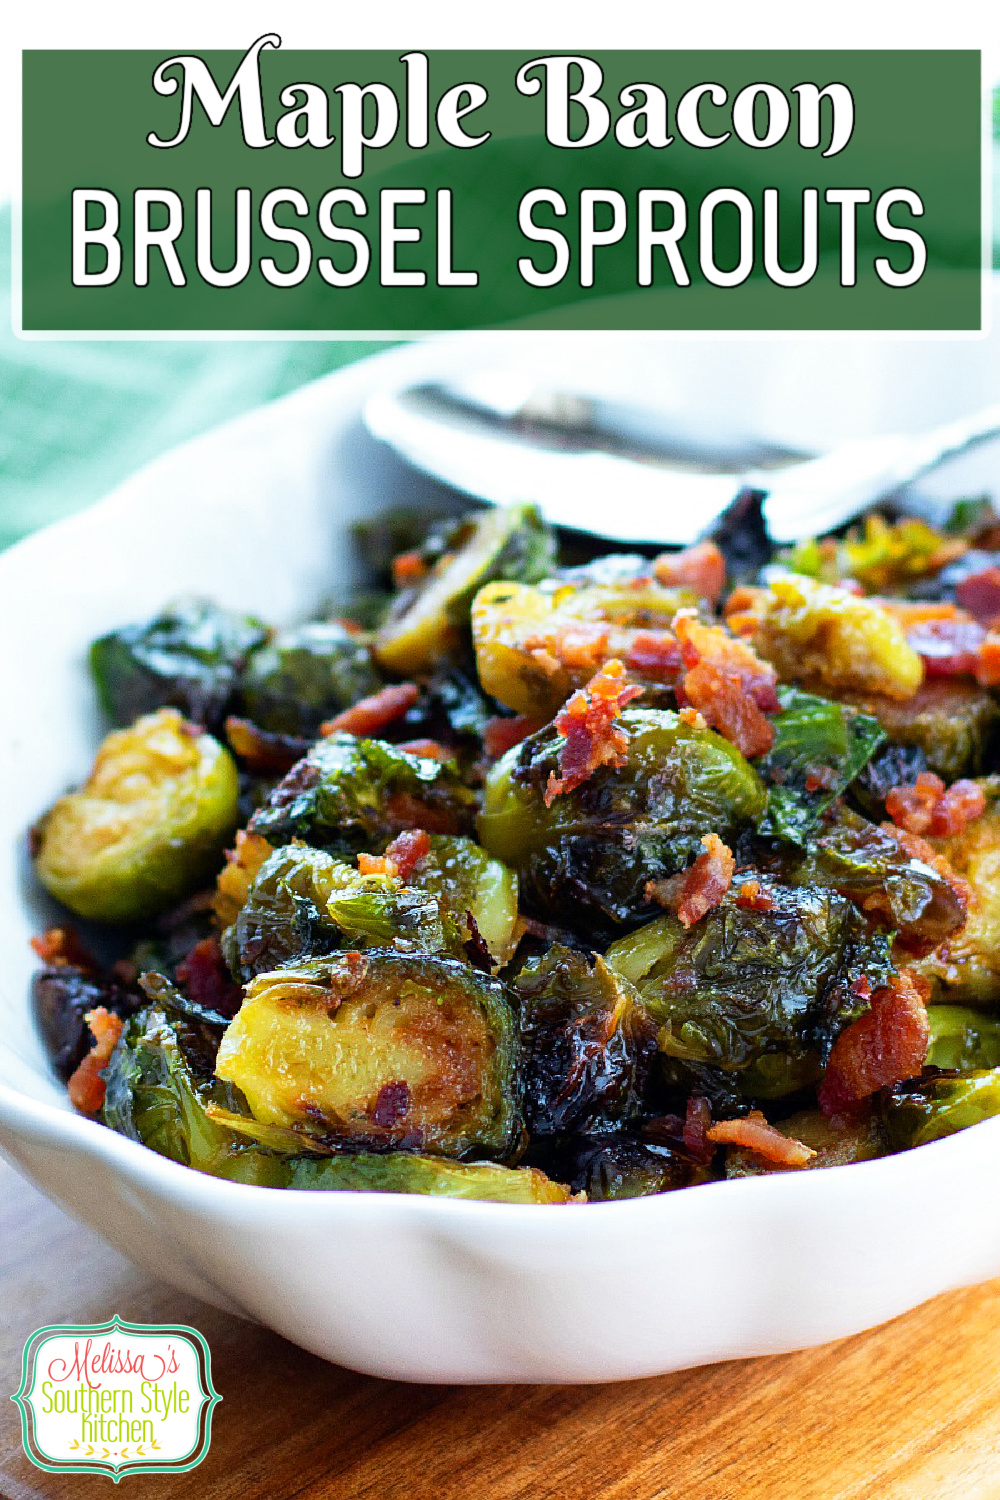 These Maple Bacon Brussel Sprouts are oven roasted until sweet and caramelized #brusselssprouts #brusselsprouts #roastedvegetables #maplebacon #bacon #maplesyrup #easyrecipes #thanksgiving #christmas #holidaysidedishes #holidayrecipes